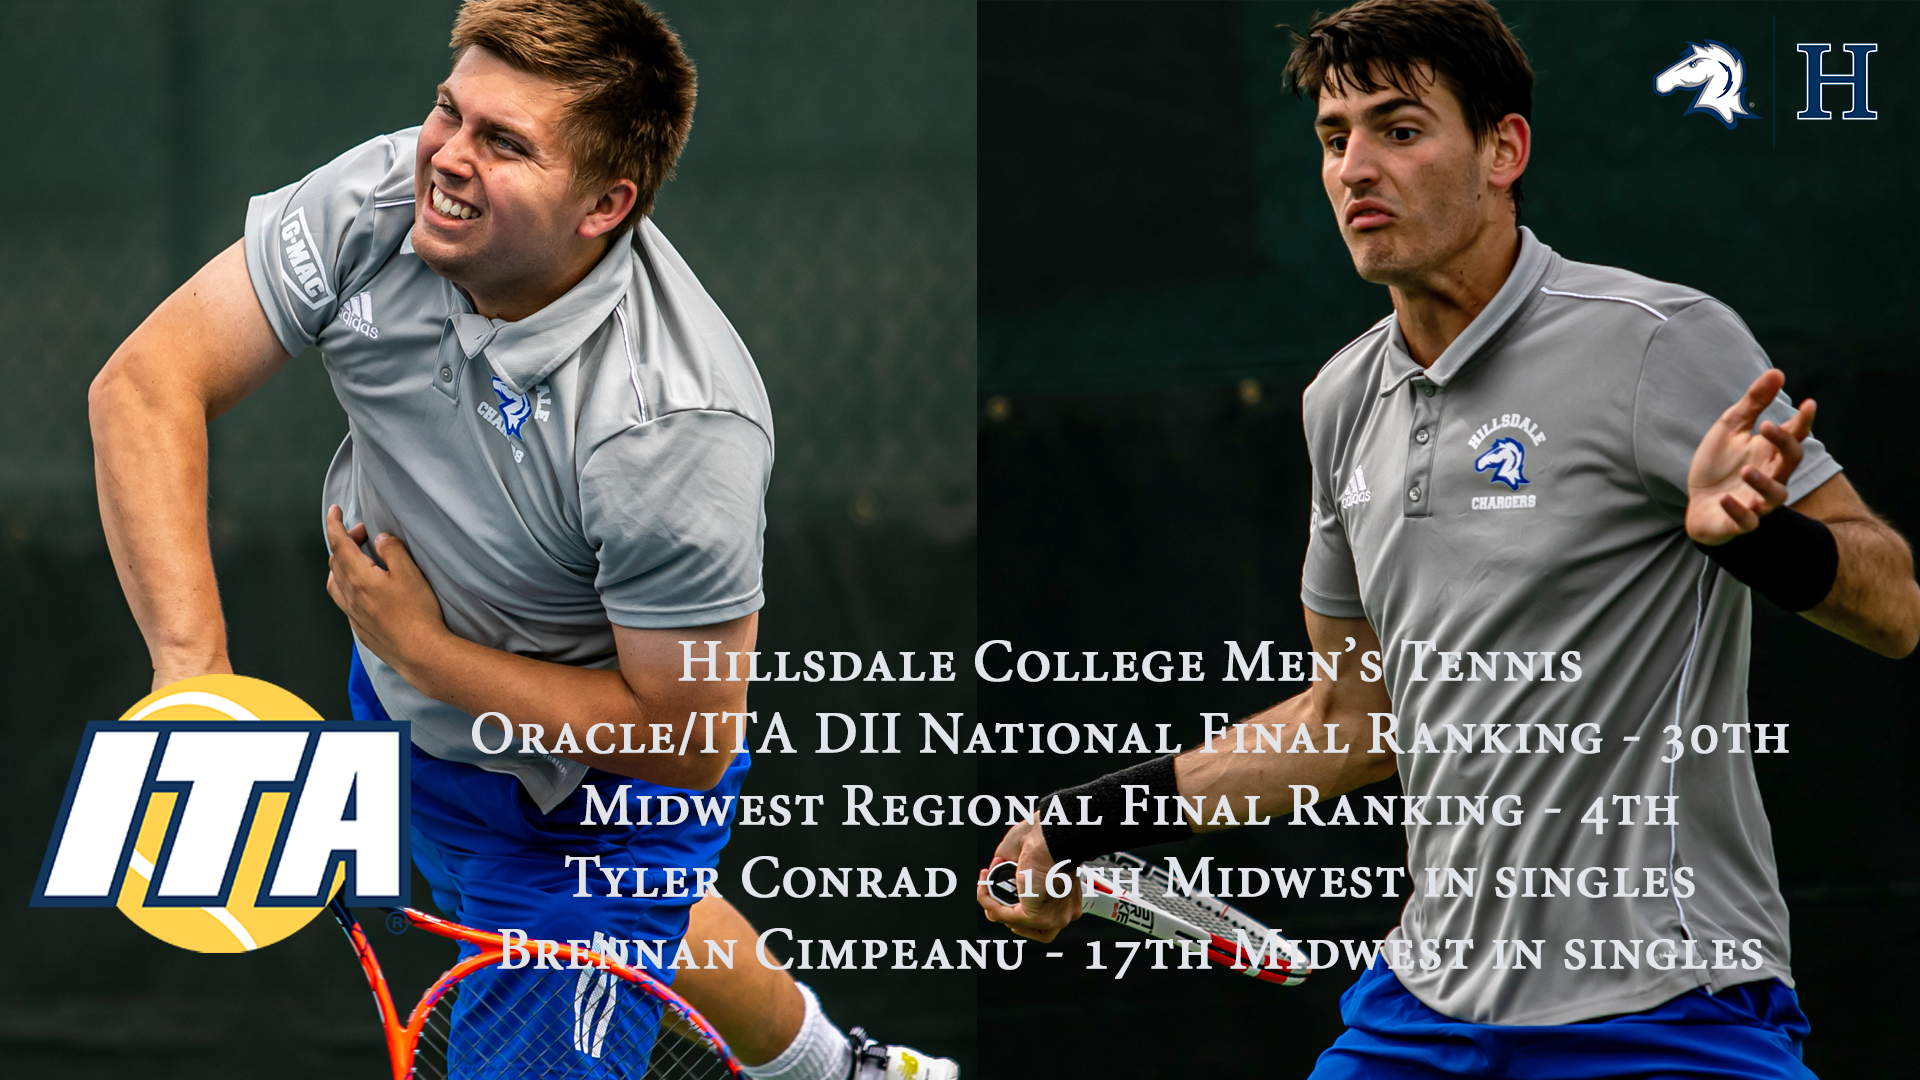 Charger men's tennis team finishes school year with highest-ever national ranking